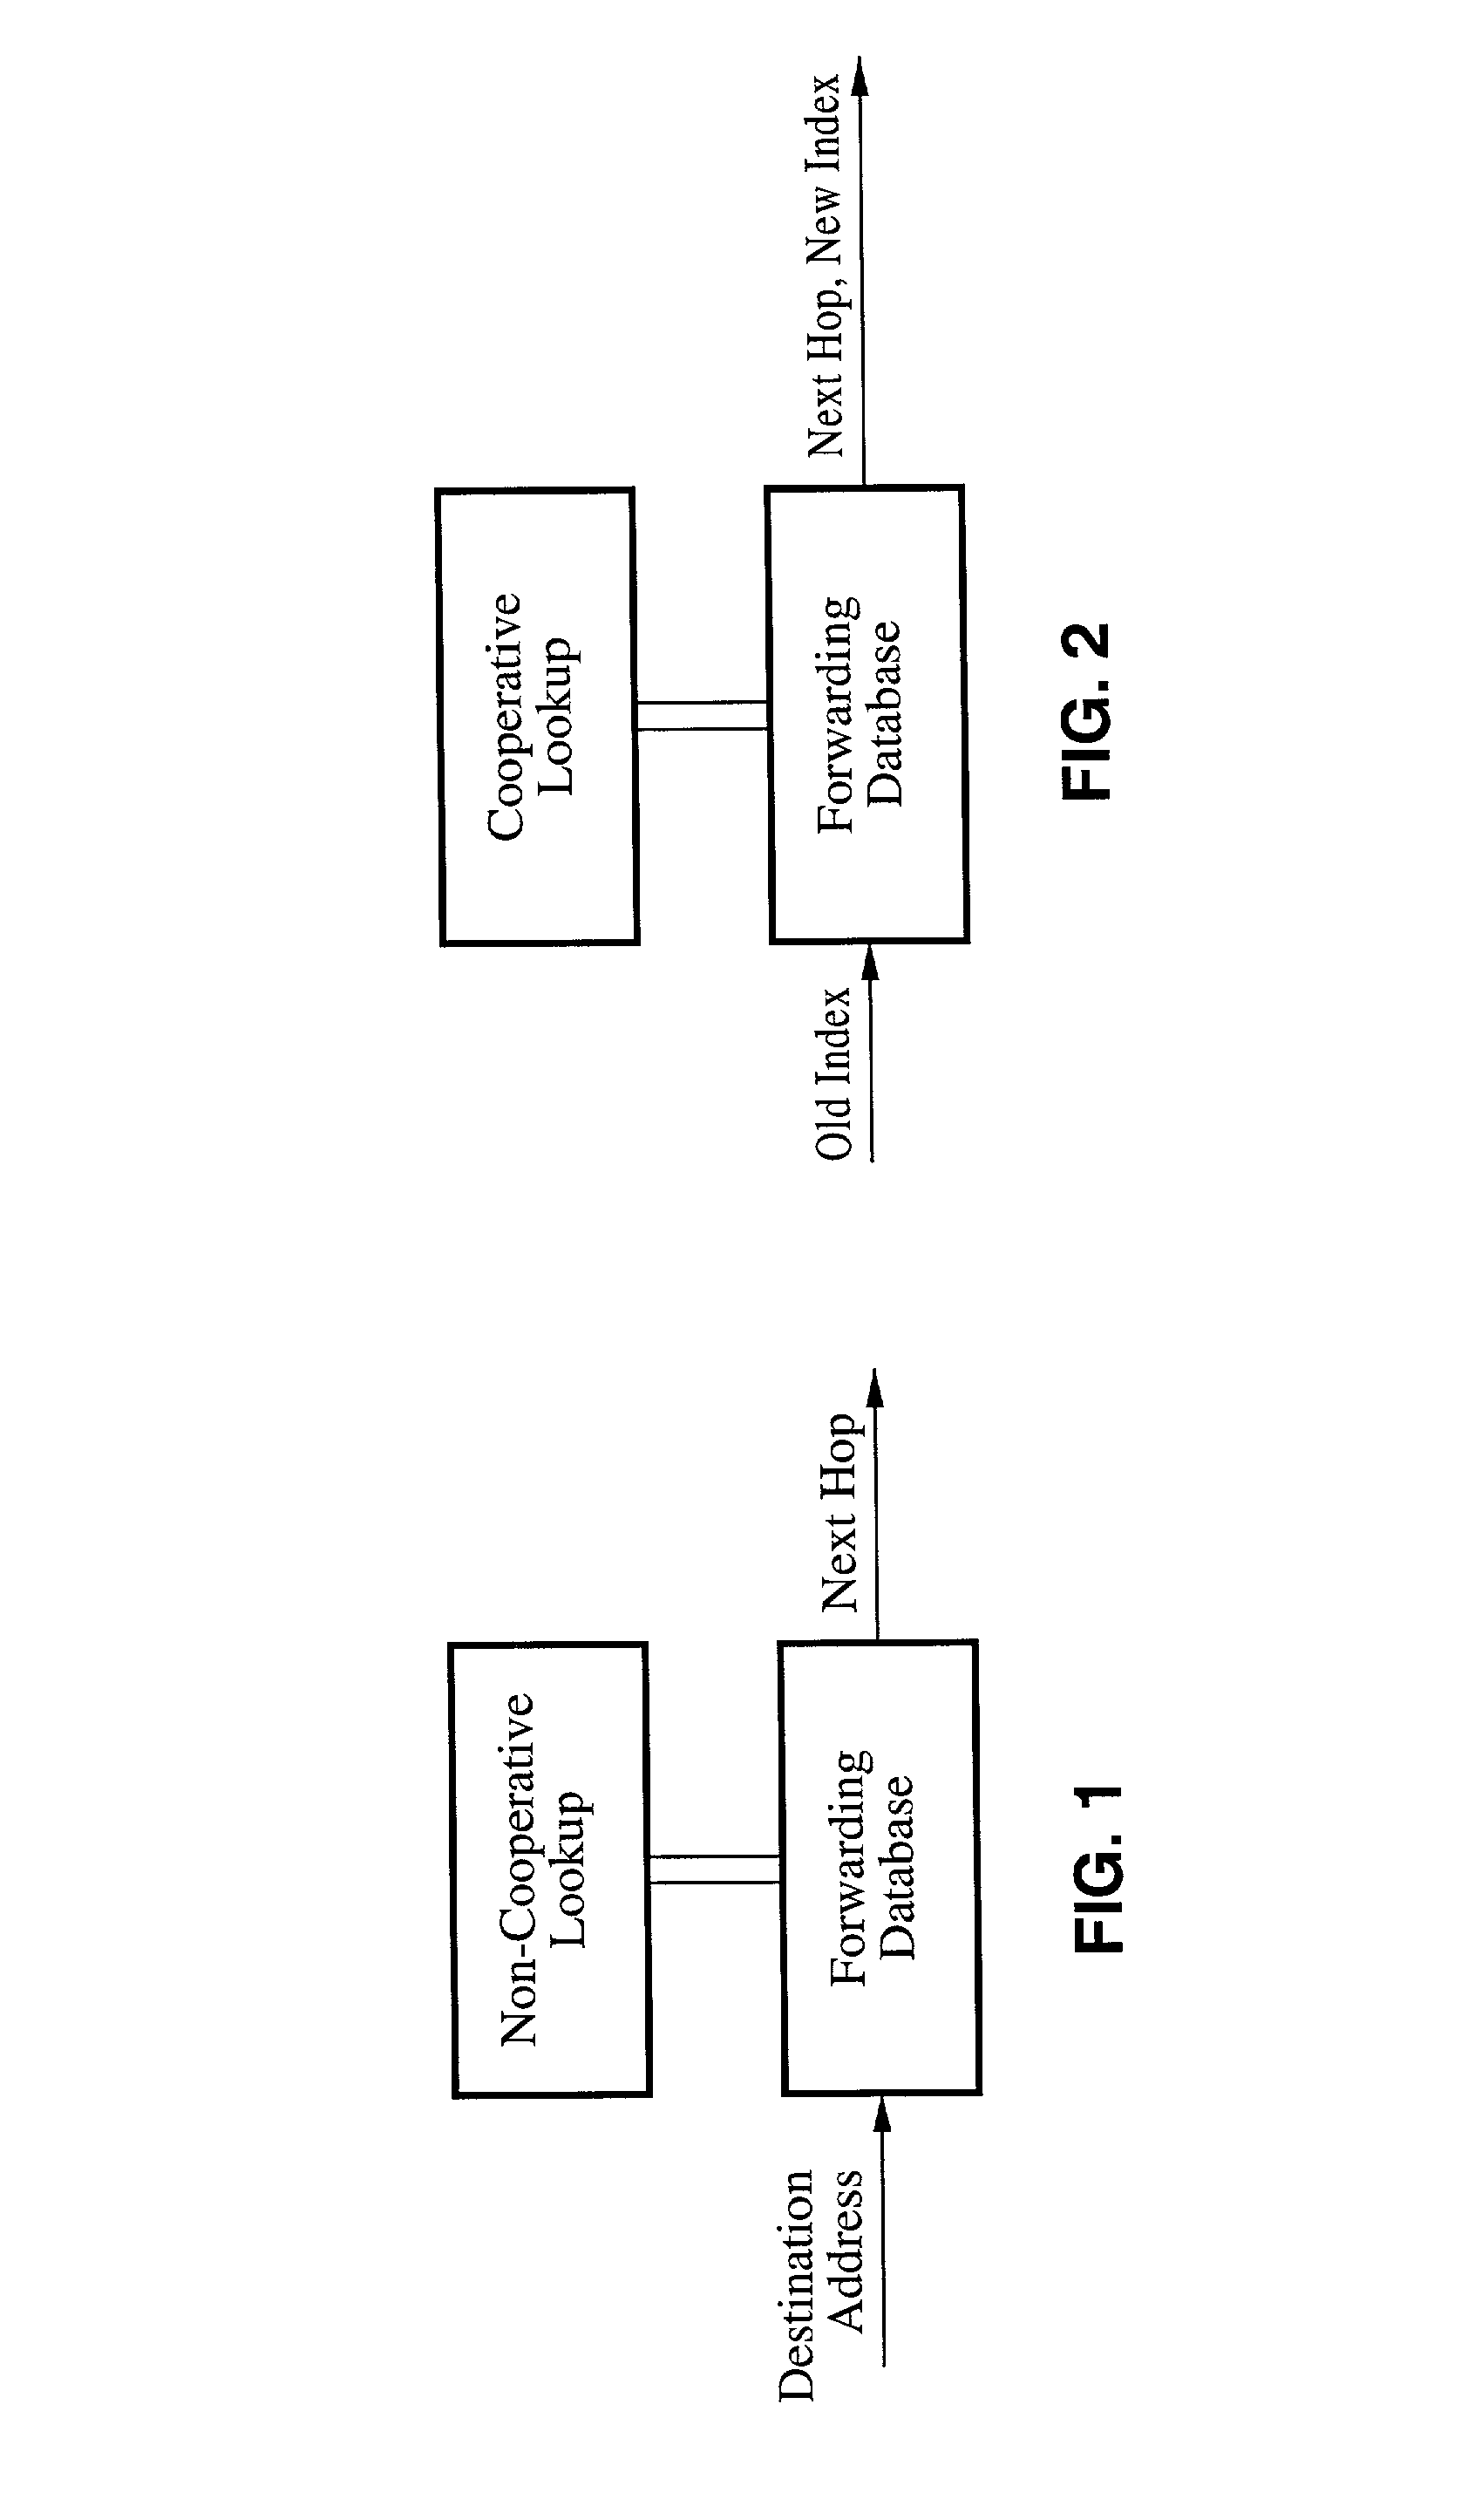 Cluster-based aggregated switching technique (CAST) for routing data packets and information objects in computer networks